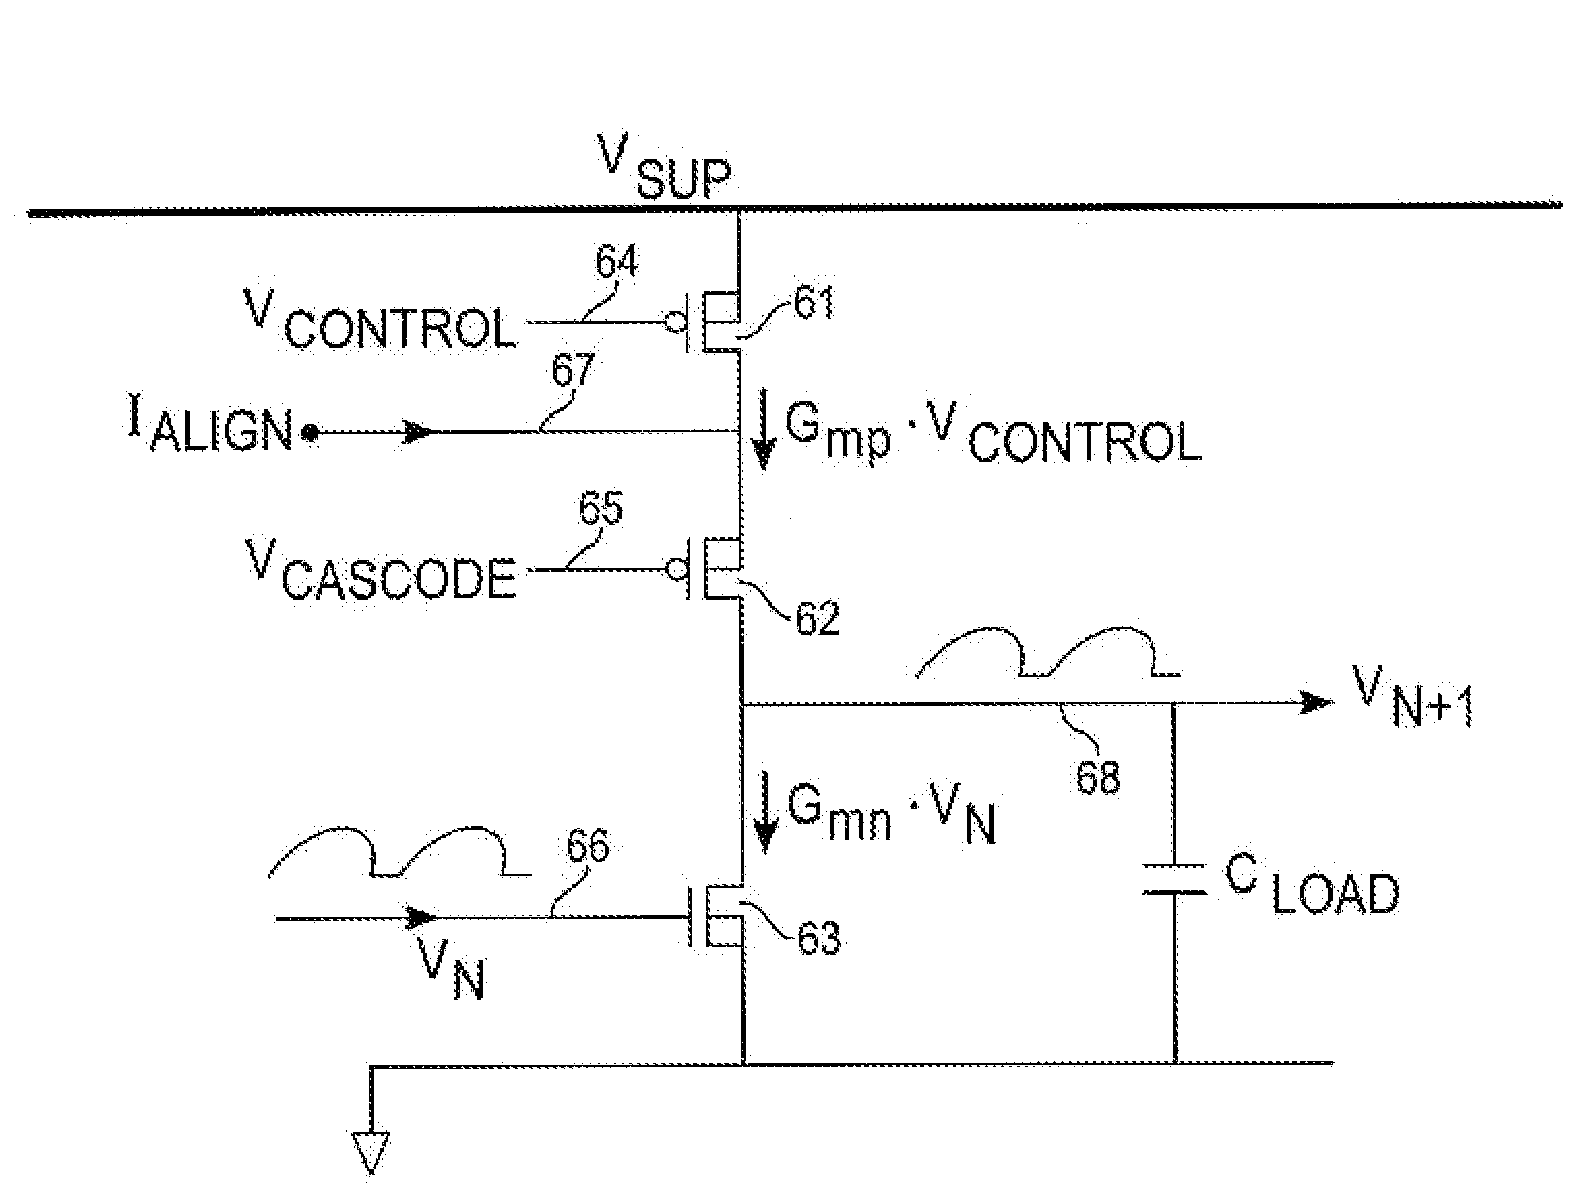 Voltage-controlled oscillator with multi-phase realignment of asymmetric stages